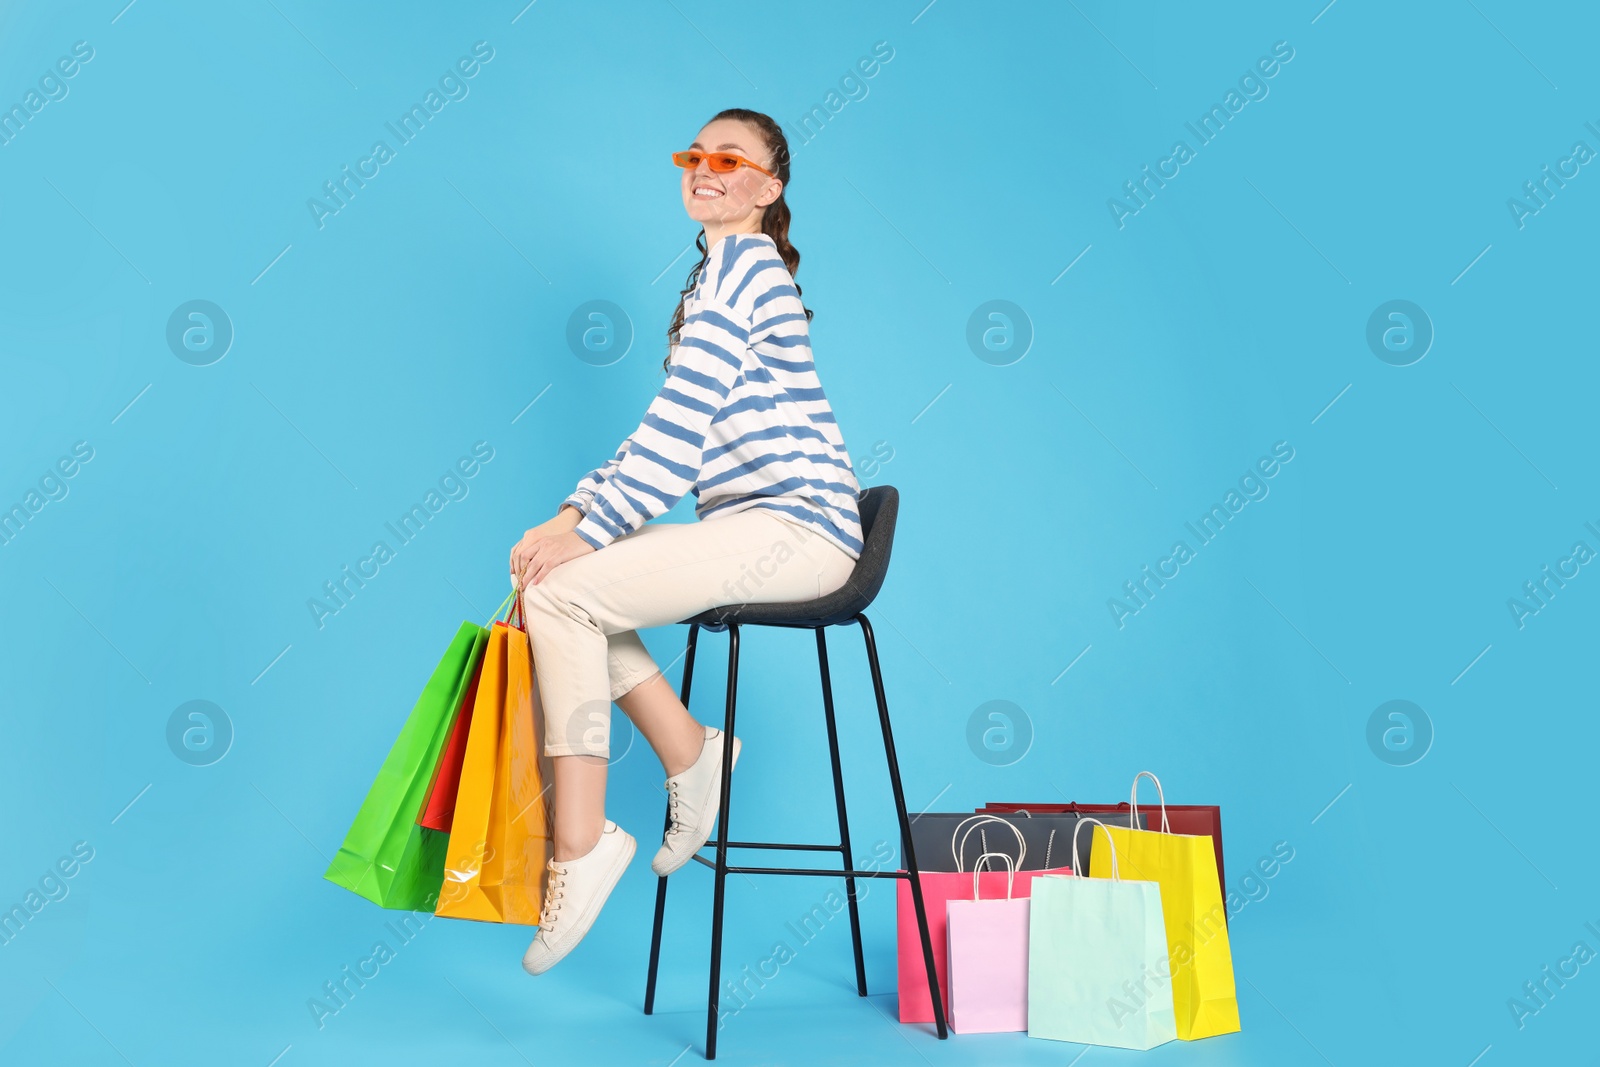 Photo of Happy woman in stylish sunglasses holding colorful shopping bags on stool against light blue background